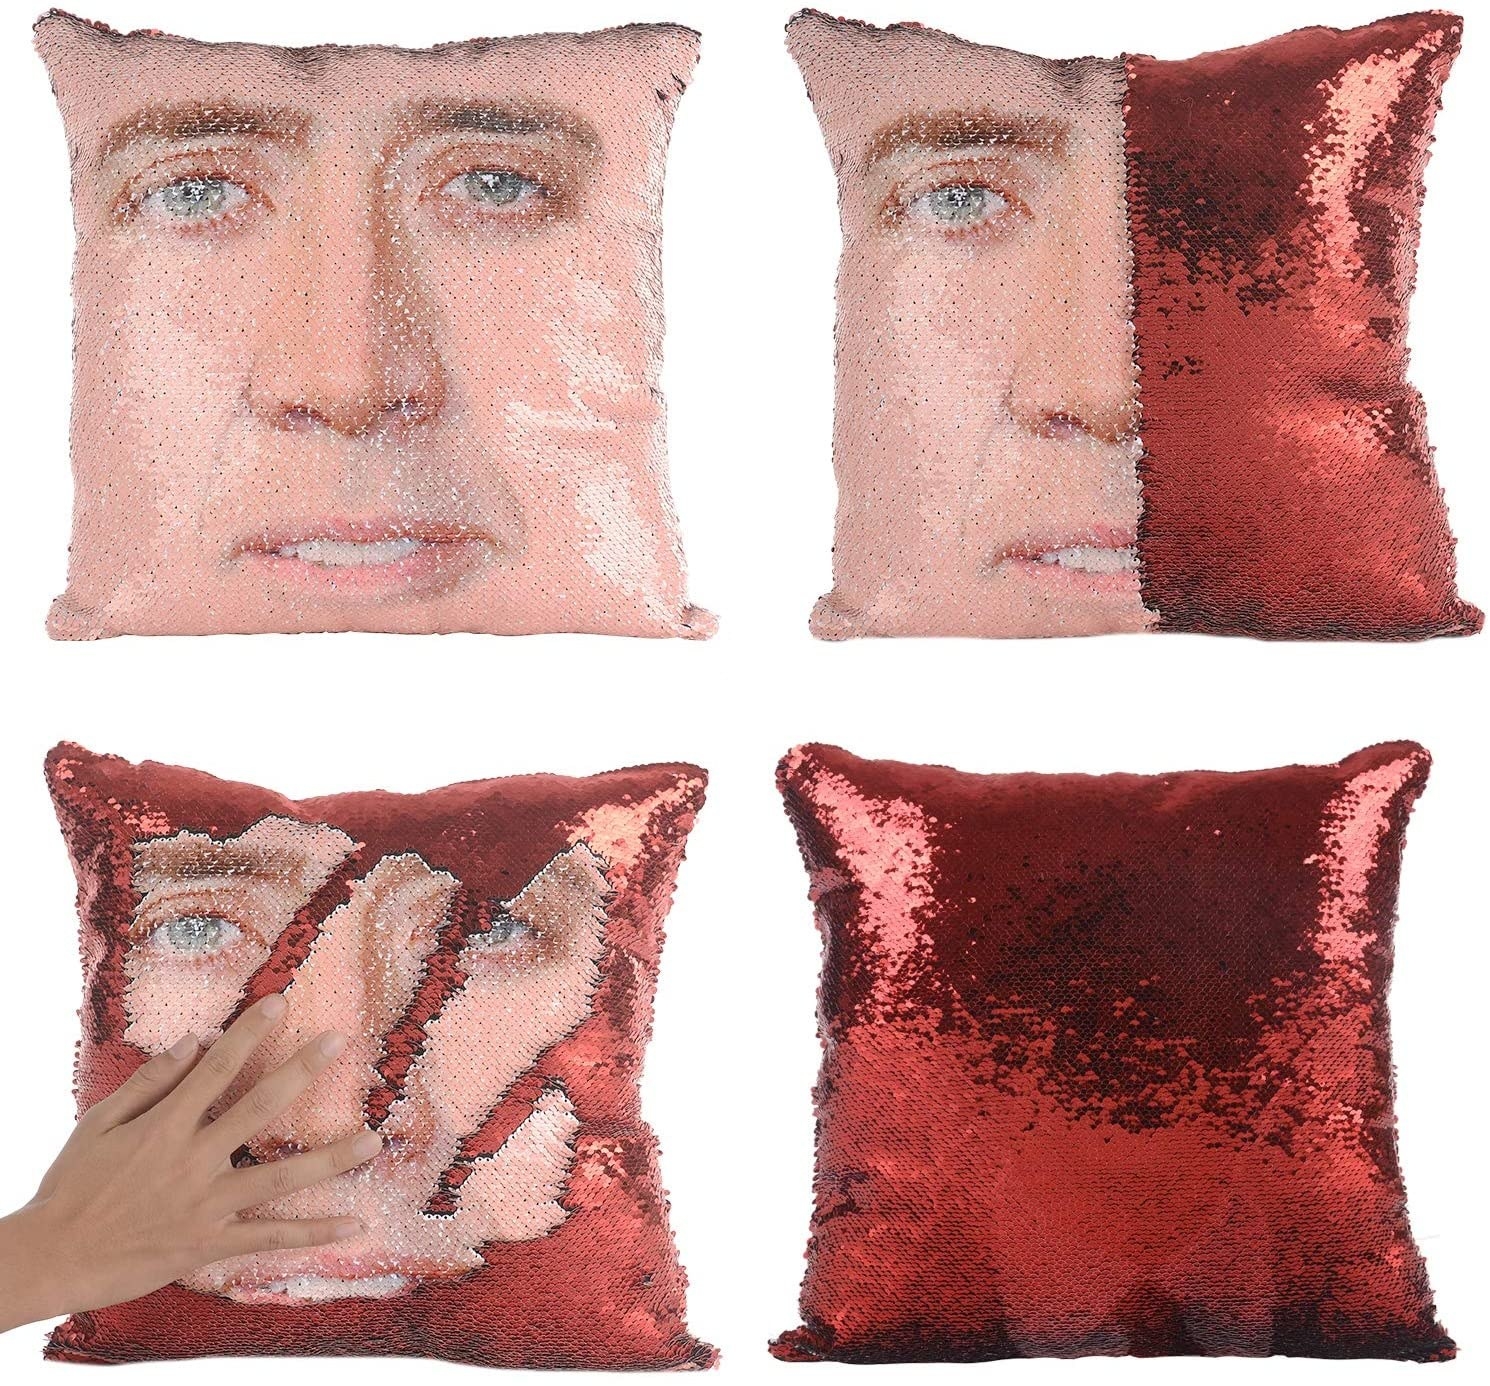 gold sequin pillow cover that when is stroked reveals a pic of Nic Cage